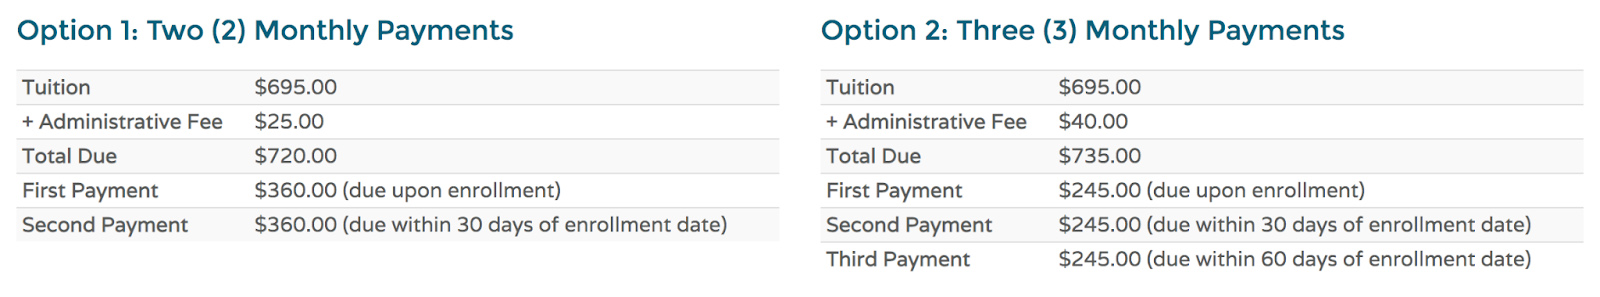 Two side by side comparisons of payment plans on payment schedule.